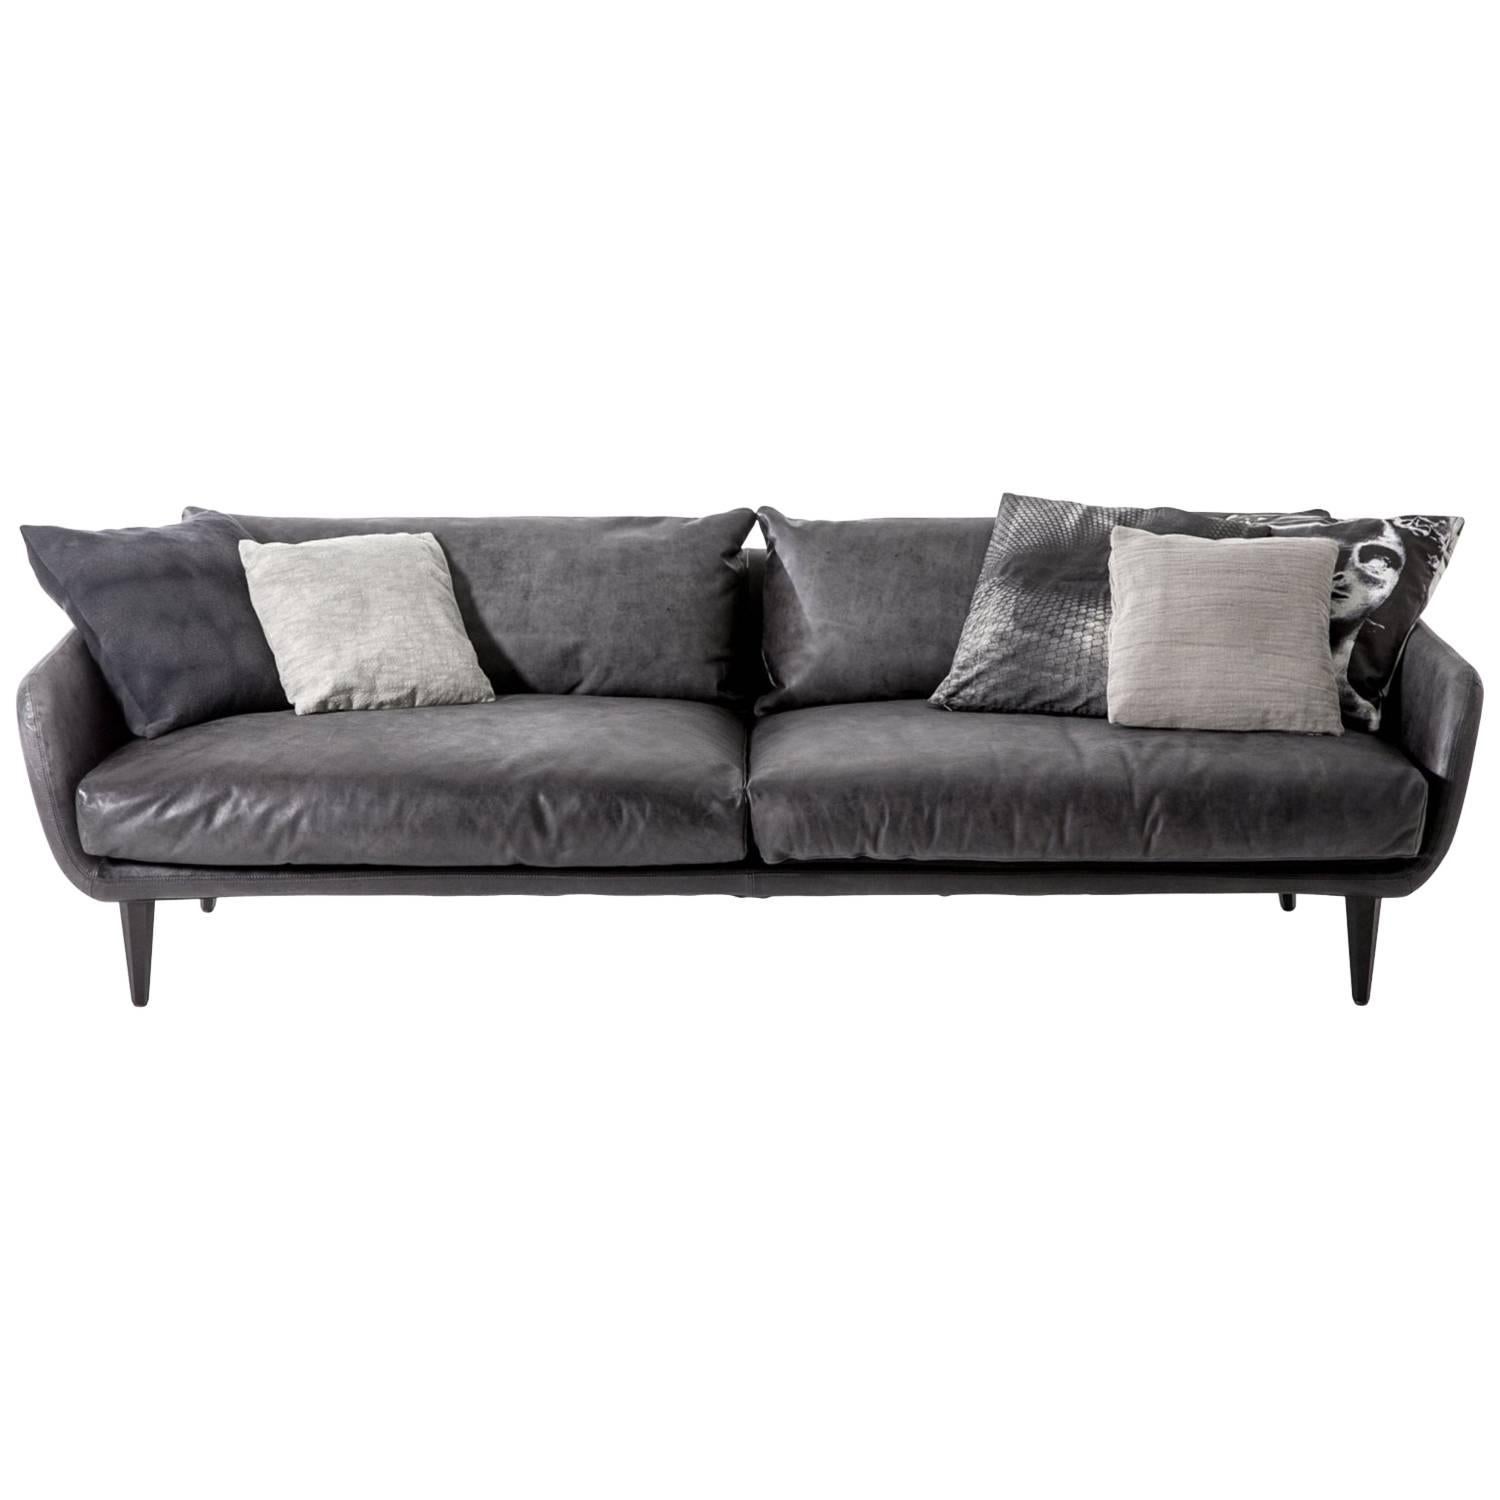 "Sister Ray" Leather Covered Three-Seat Sofa by Moroso for Diesel